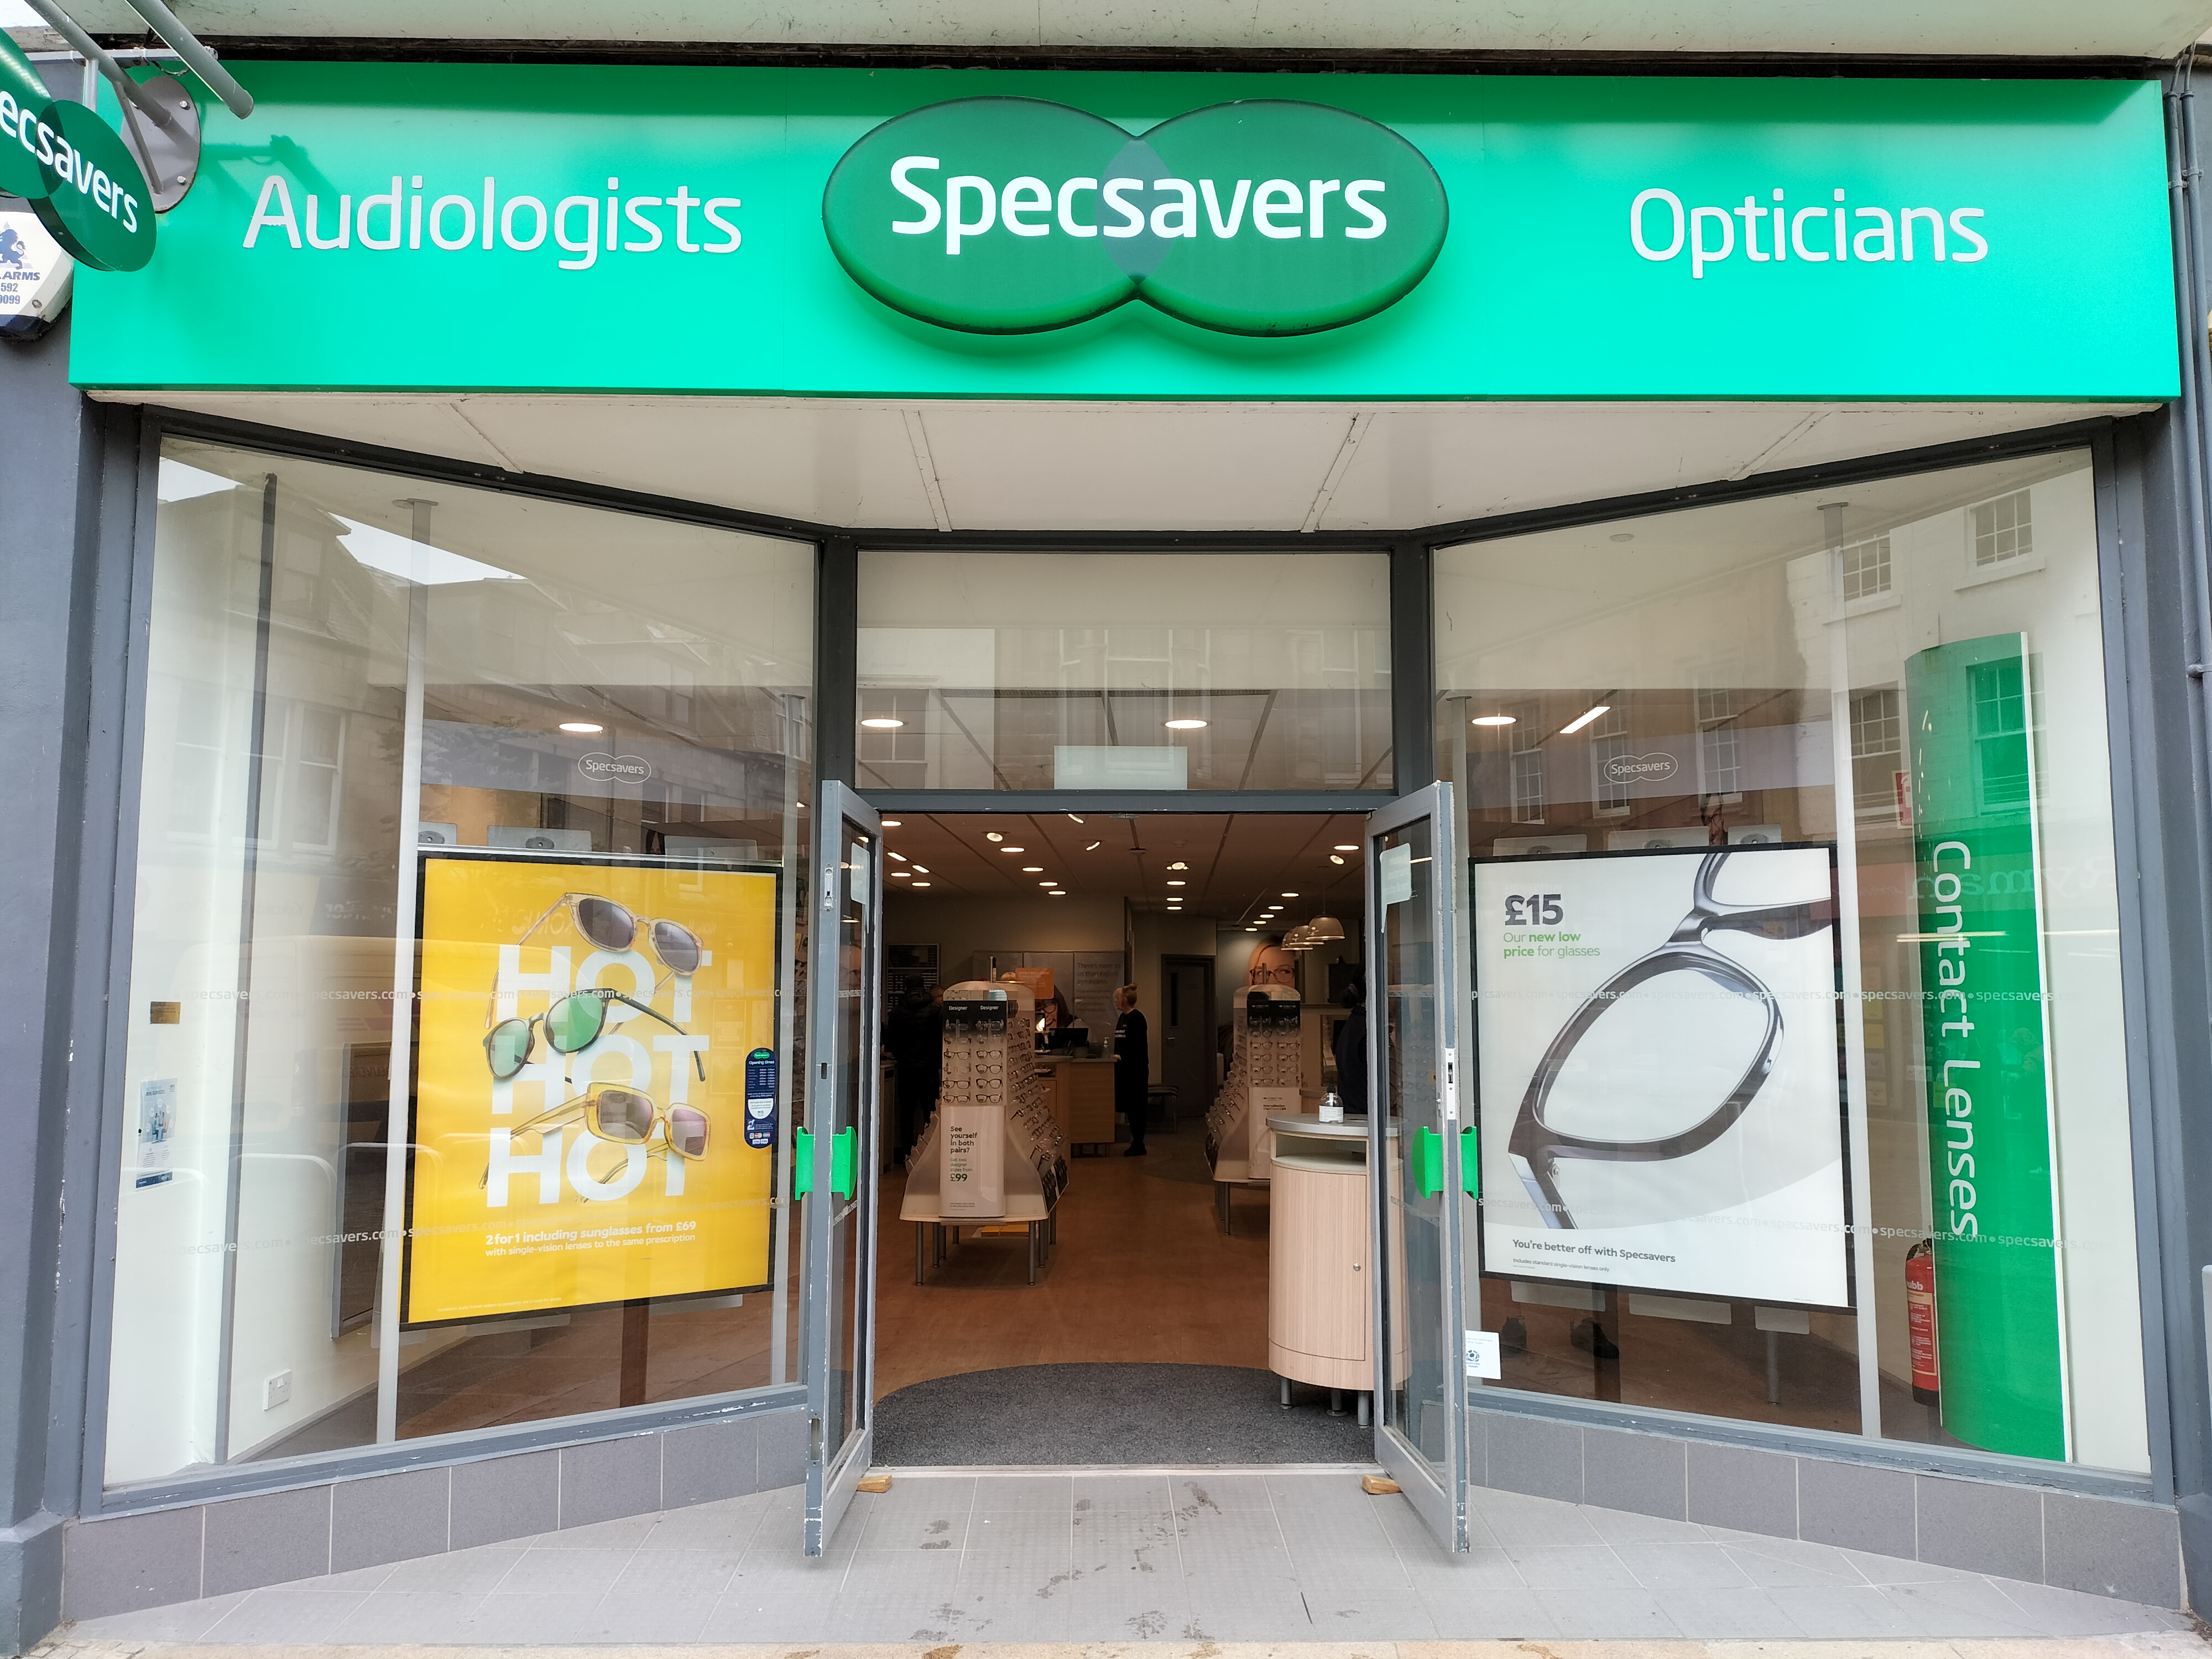 Images Specsavers Opticians and Audiologists - Kirkcaldy